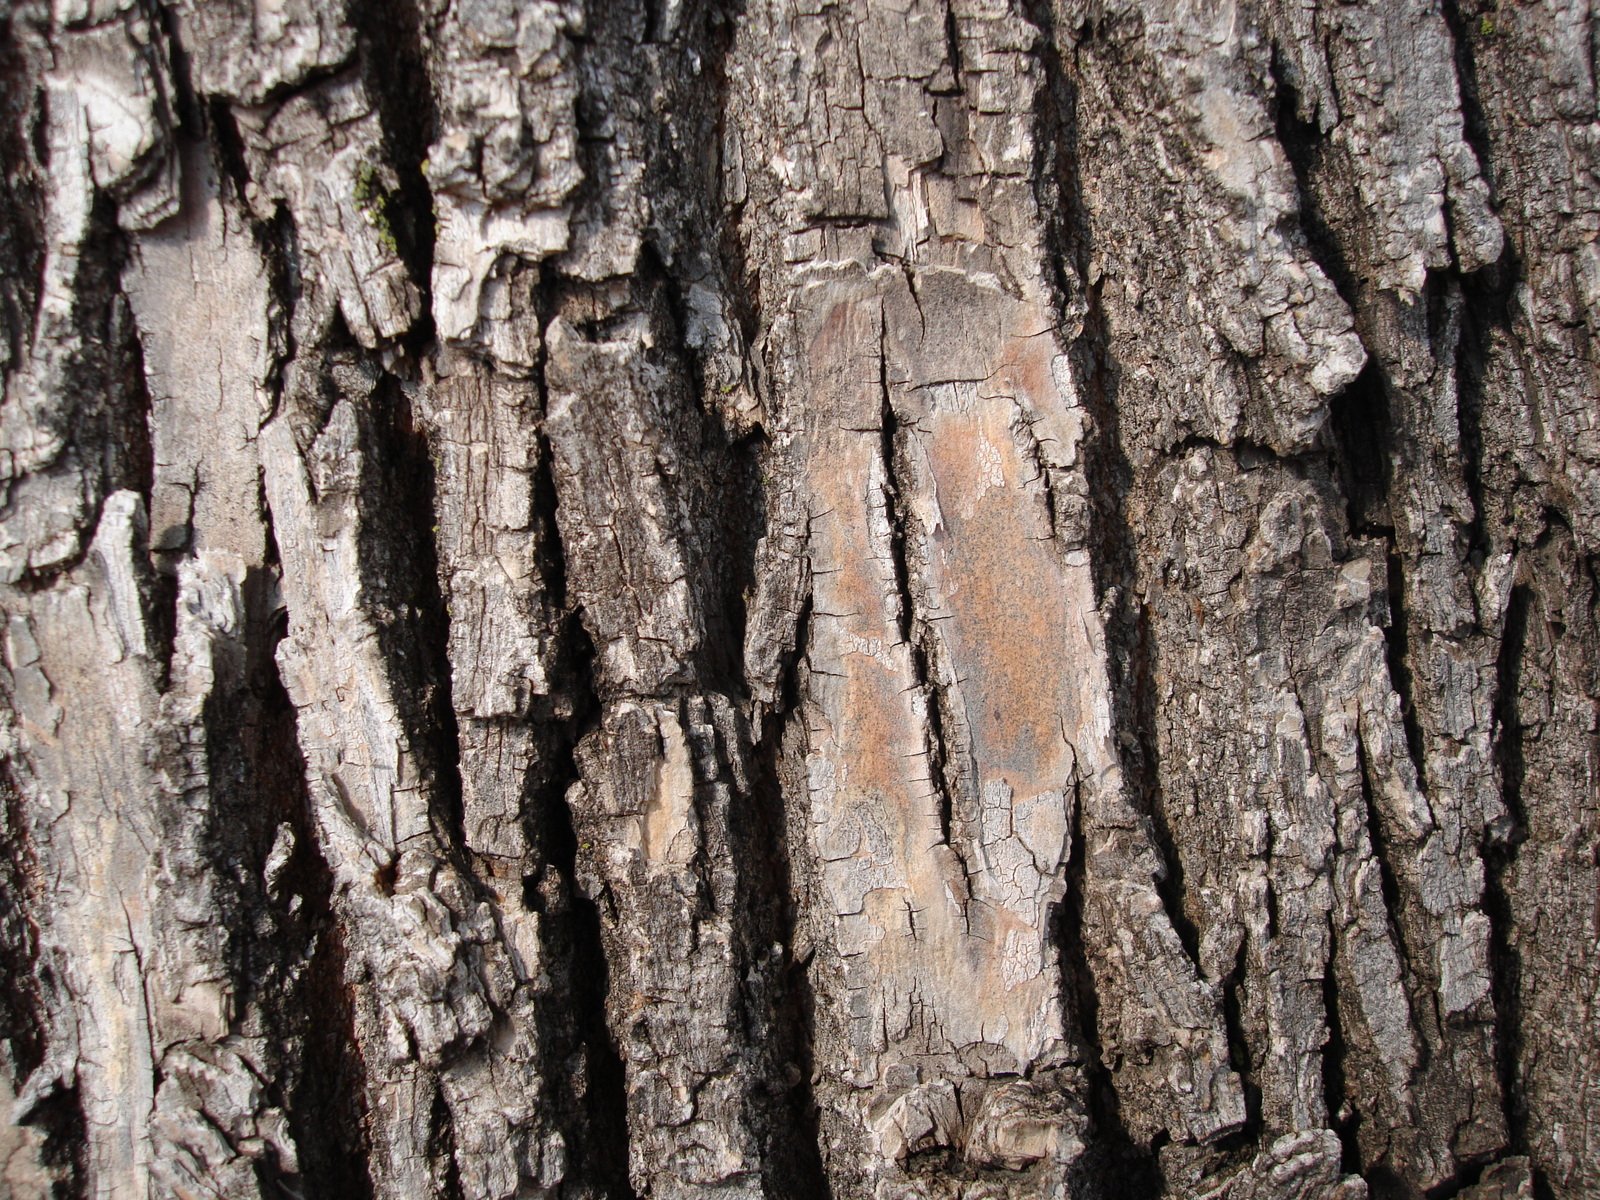 an old tree bark with some interesting patterns